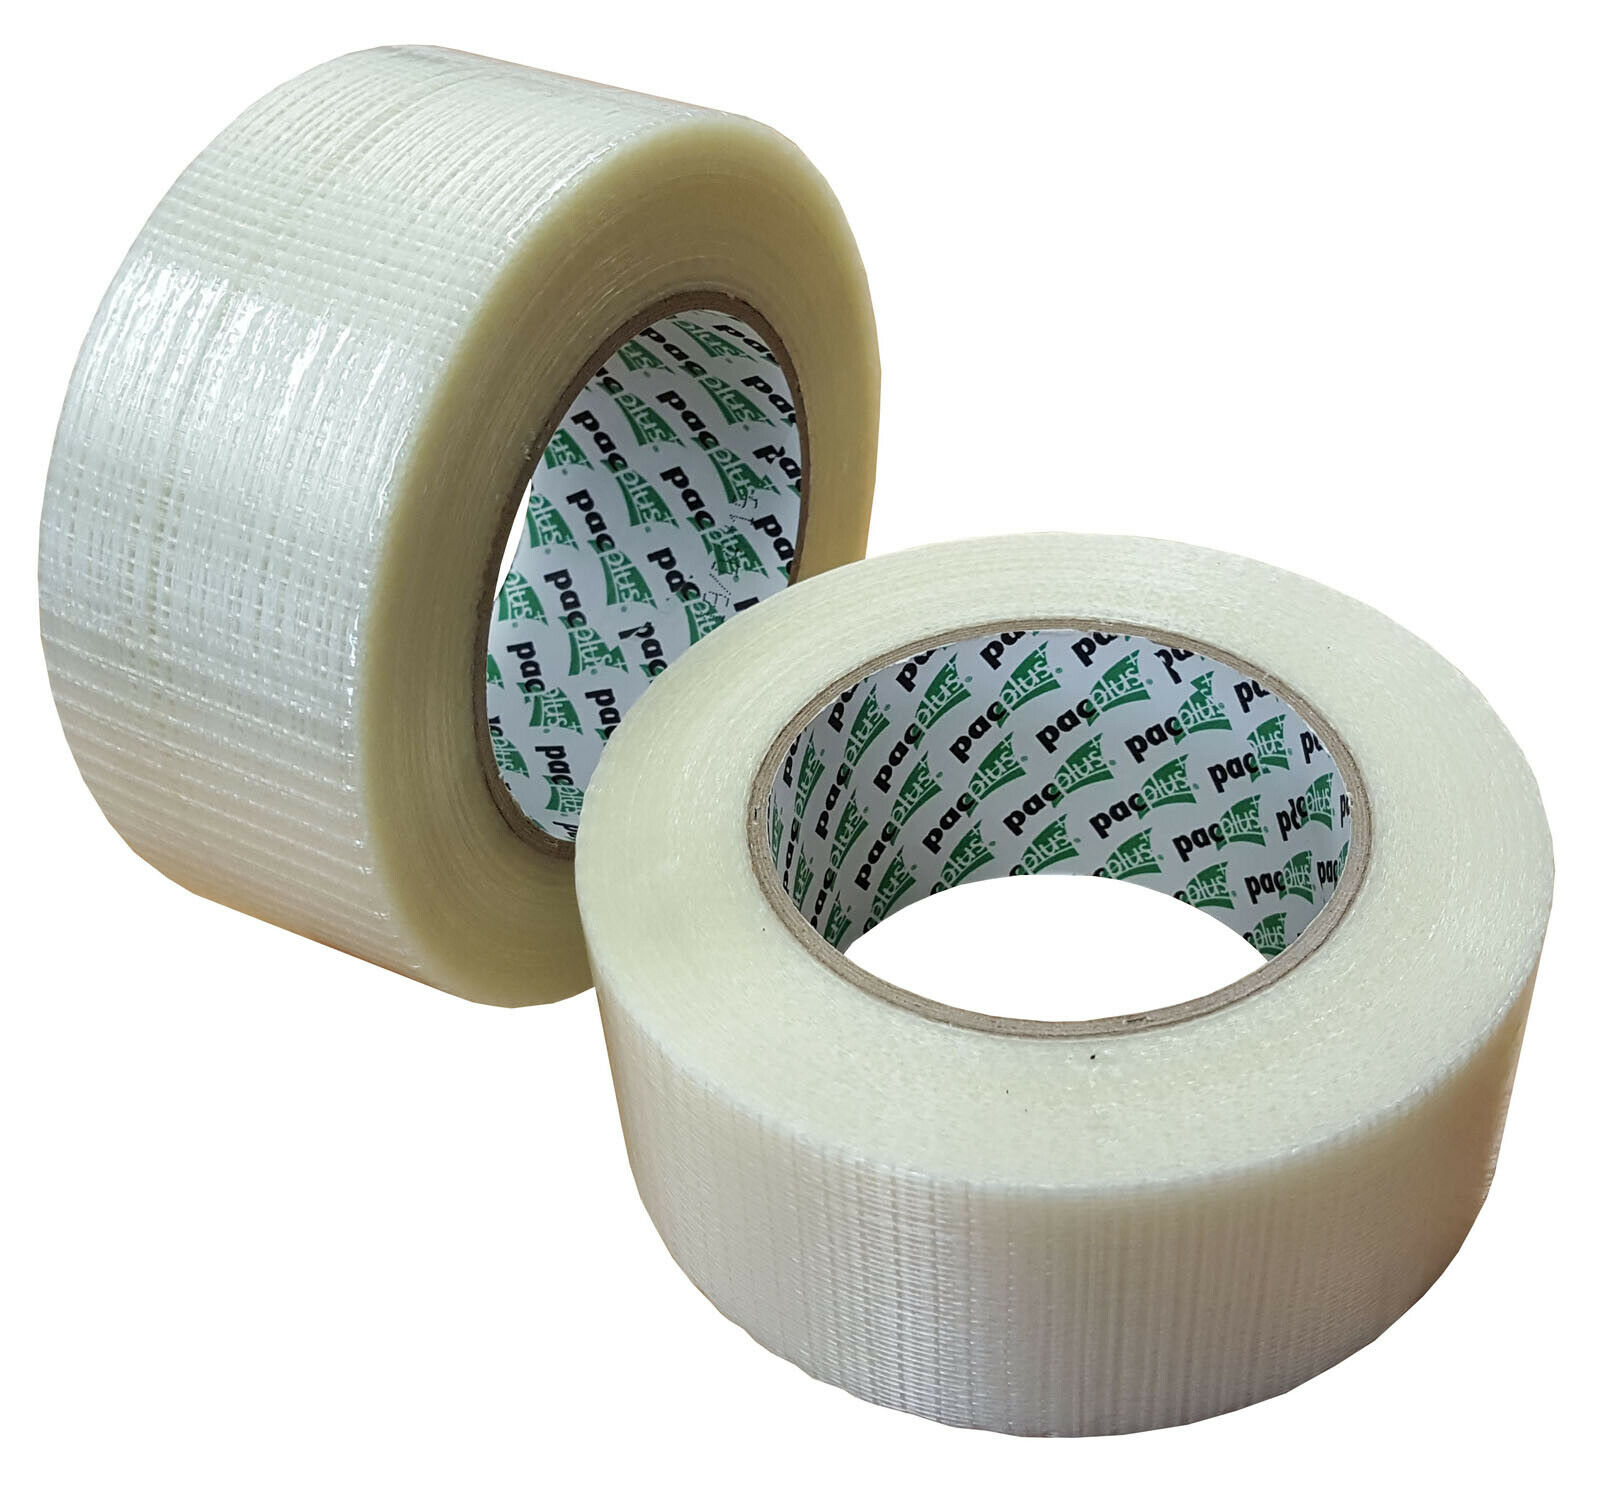 50mm x 50m Reinforced Crossweave Adhesive Super Heavy Duty Packing Tape